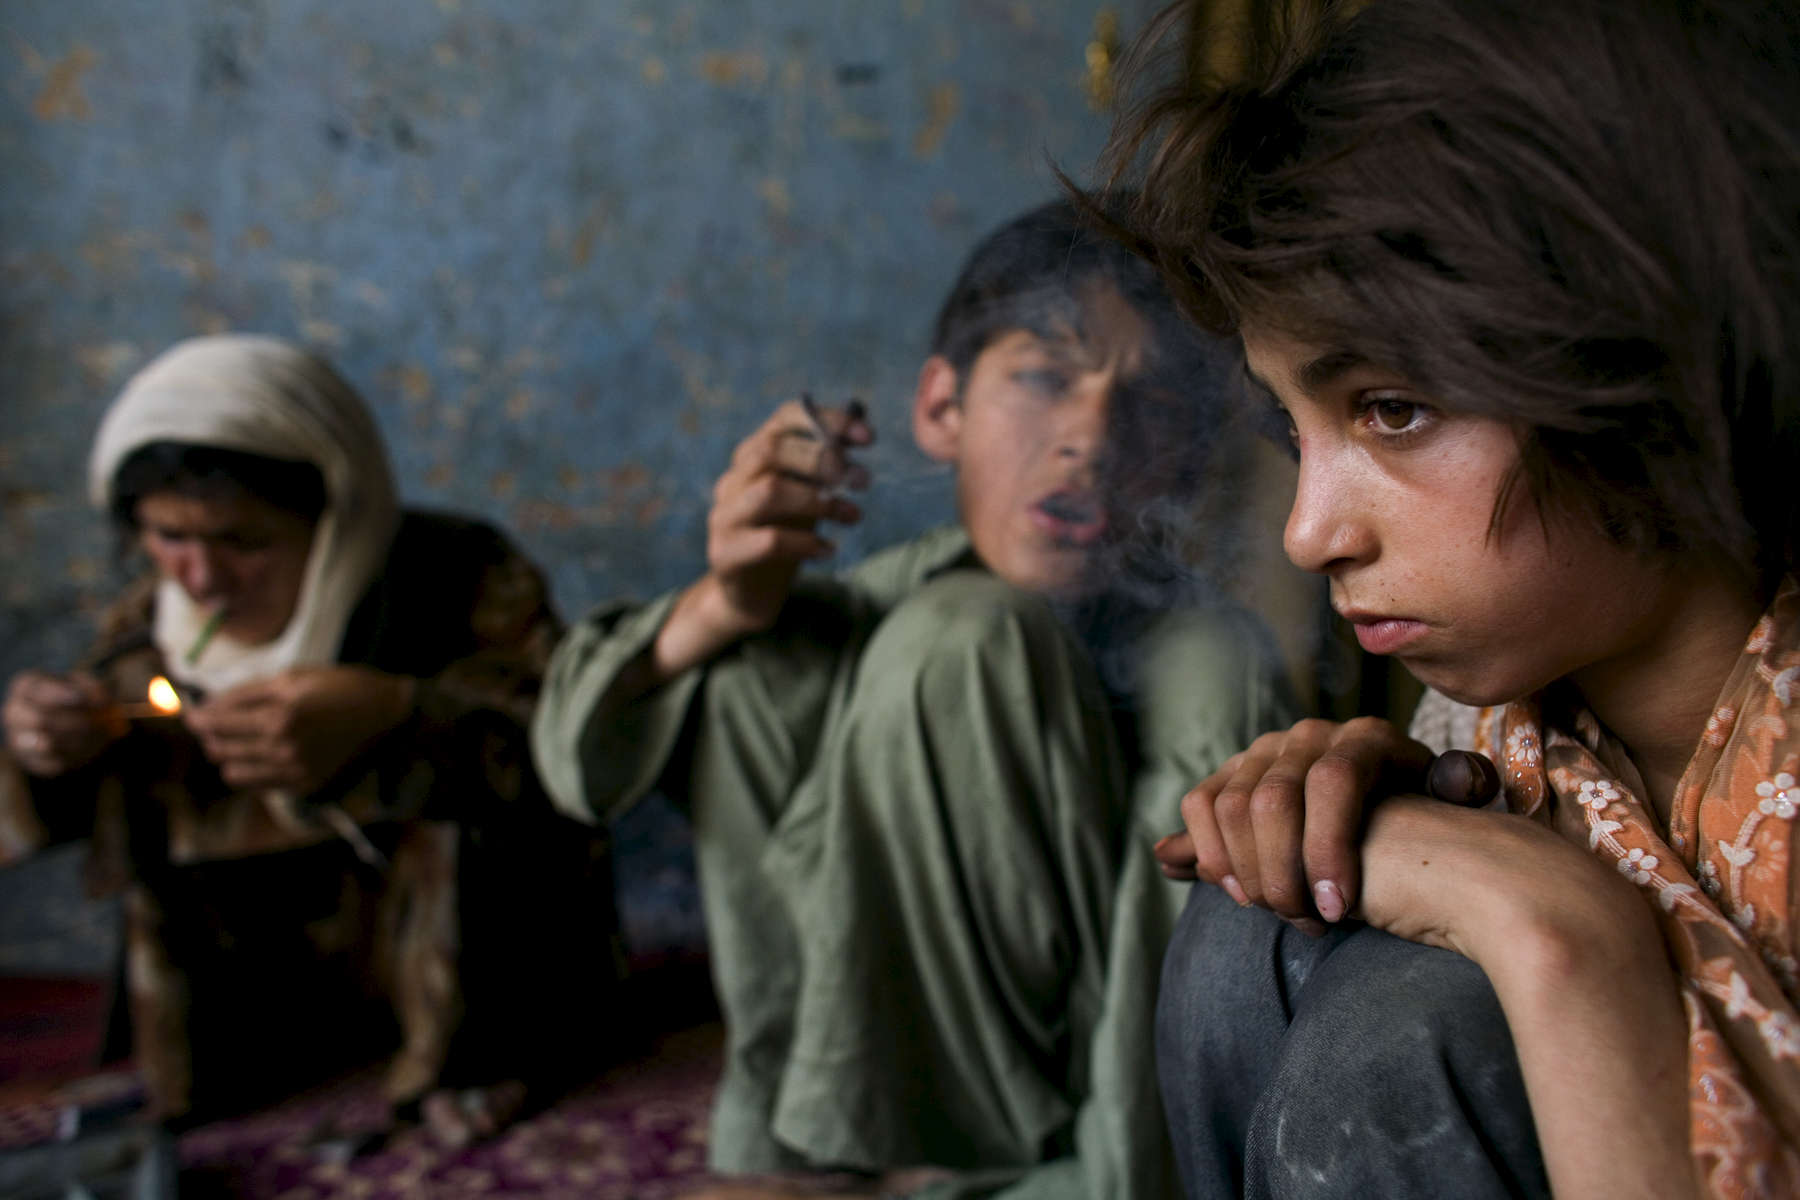 Zaher, 14, smokes heroin along side his heroin addicted mother Sabera and her 11 year-old sister, Gulparai, at their home in Kabul.  The children began smoking after watching their widowed mother, a heroin addict for 4 years. August 27, 2007